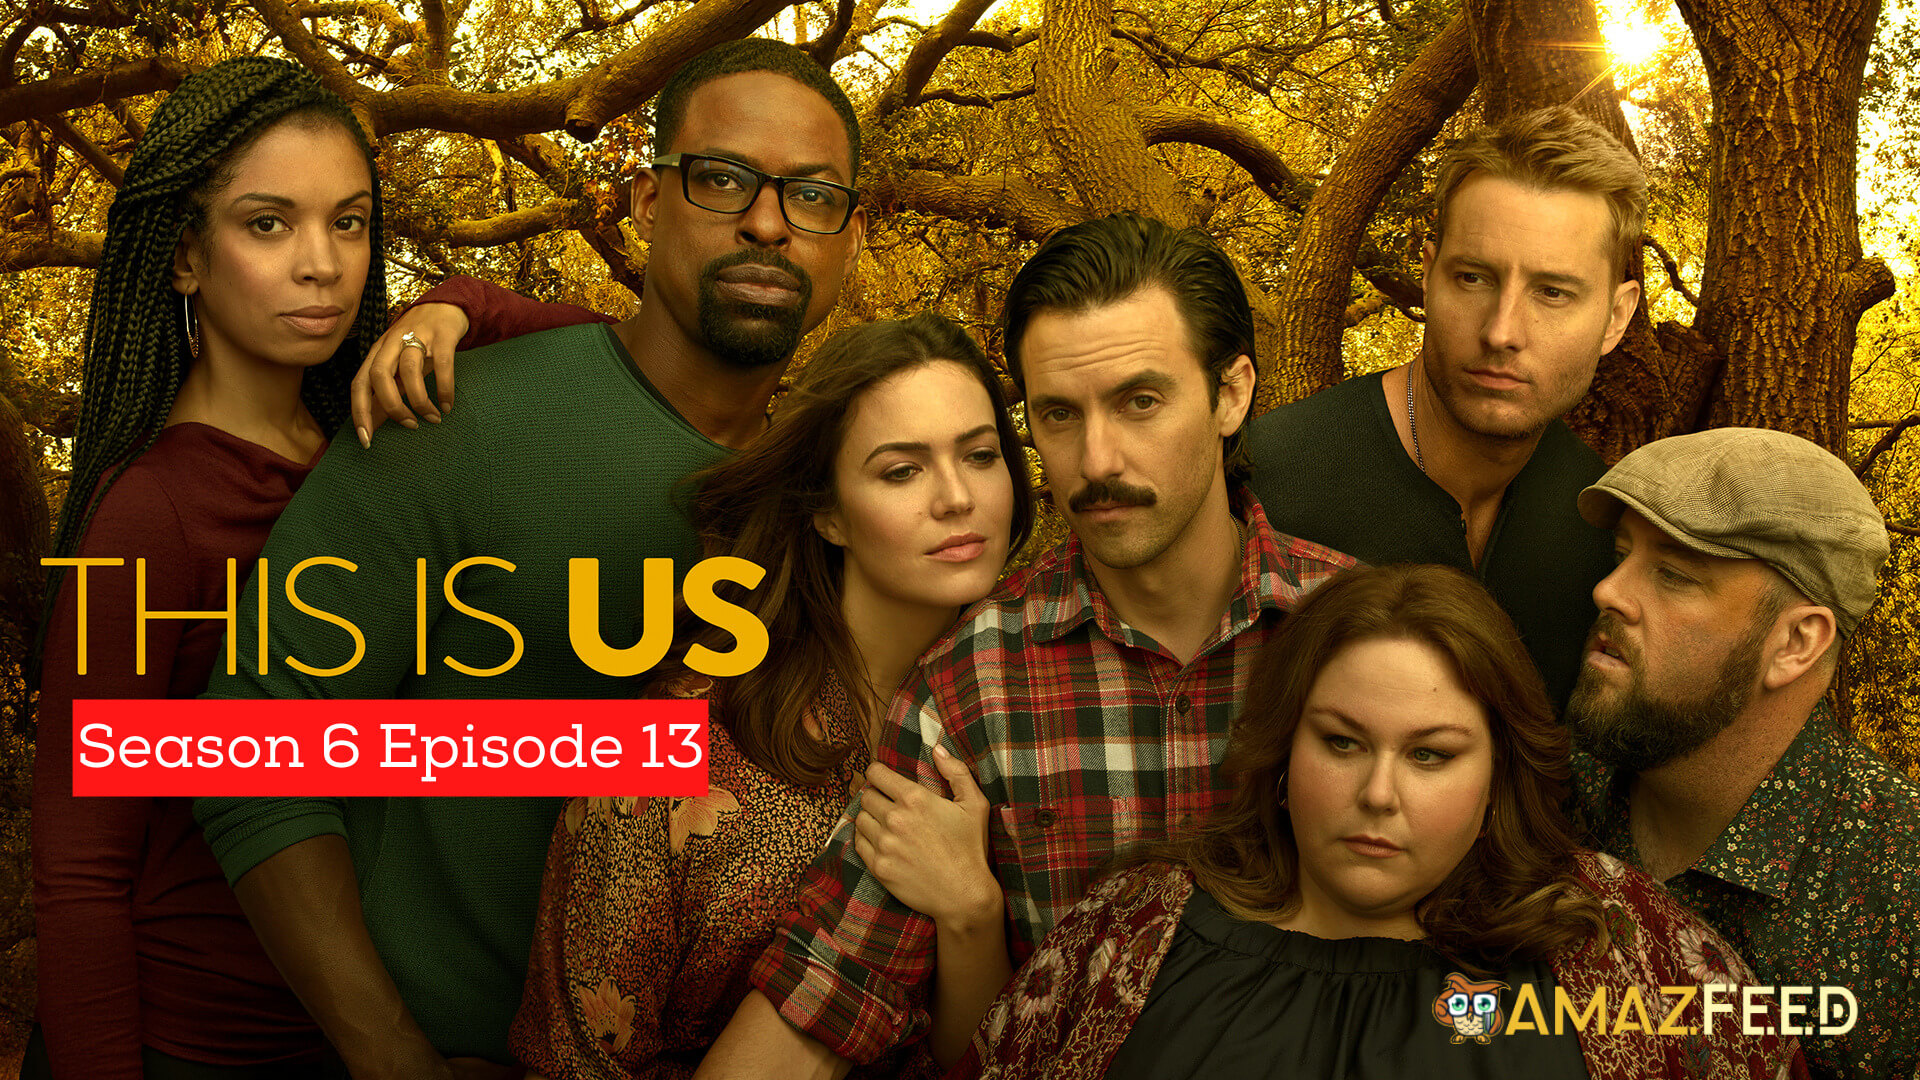 This Is Us Season 6 Episode 13 Release Date